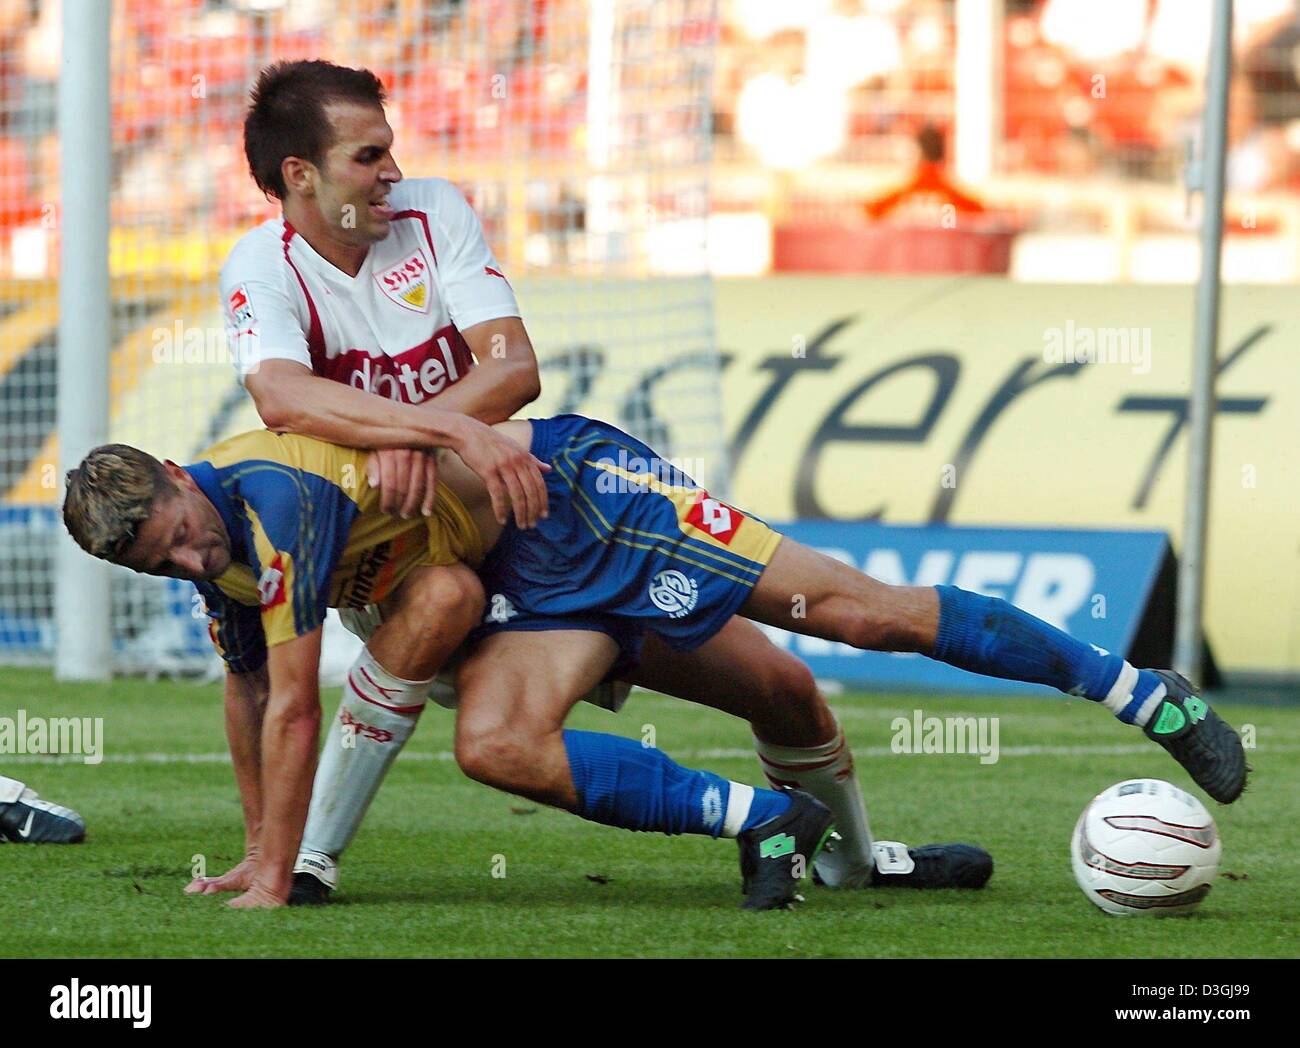 (dpa) - Stuttgart's Markus Babbel (L) tries to separate Mainz' Juergen Kramny (front) from the ball  during the Bundesliga soccer game opposing VfB Stuttgart and FSV Mainz 05 in Stuttgart, Germany, 8 August 2004. Stuttgart wins the first round game 4-2 and is now spearheading the league table. Stock Photo